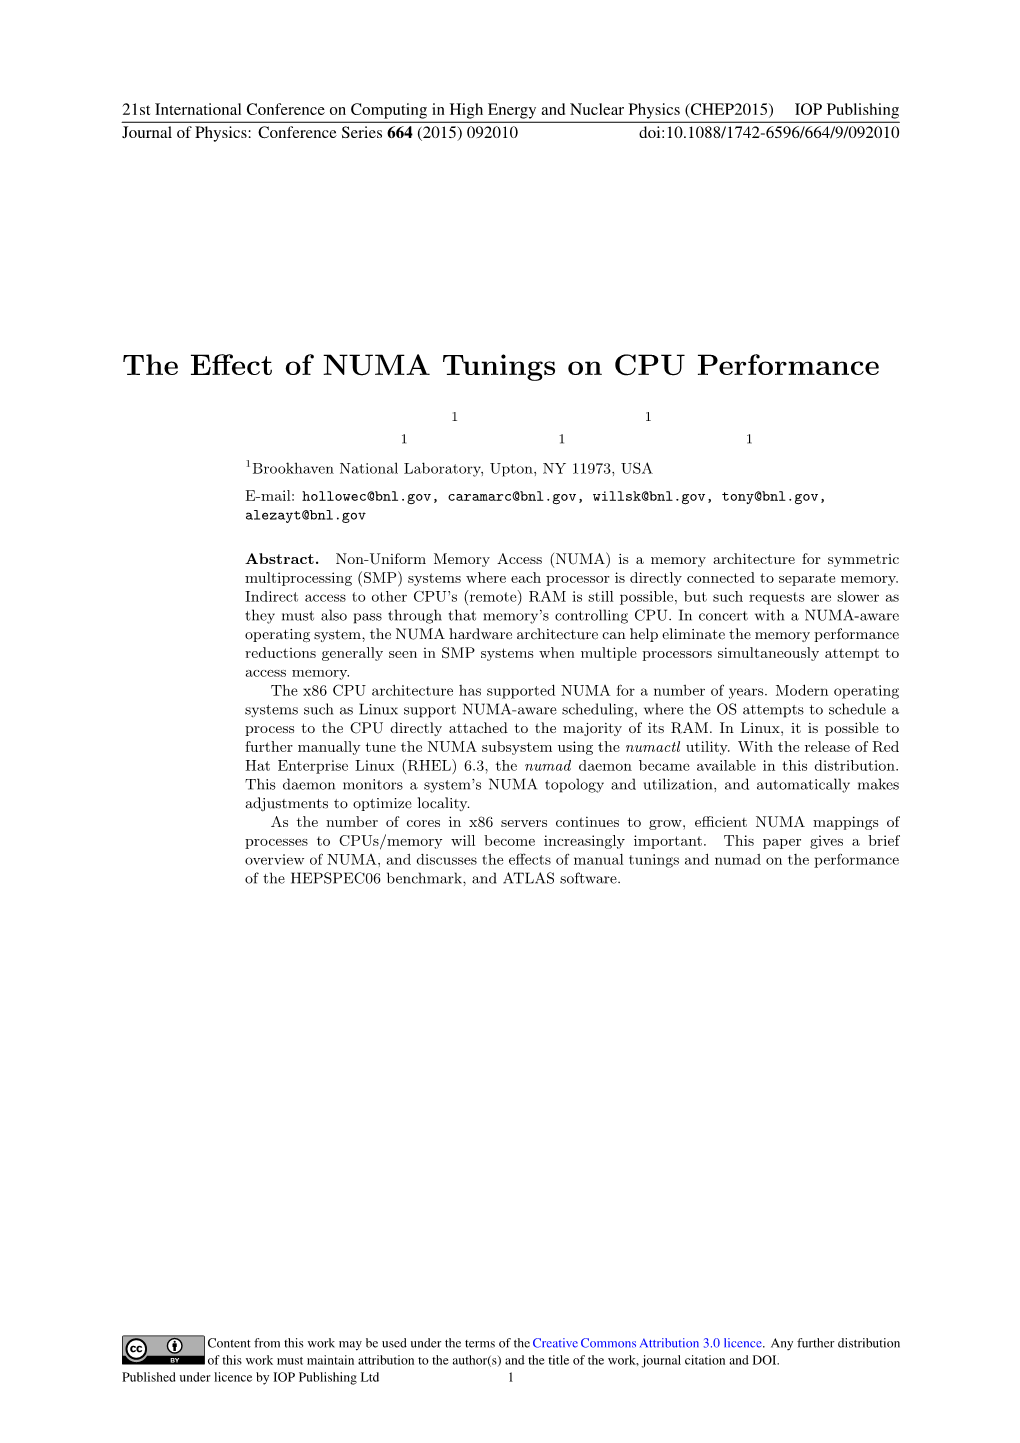 The Effect of NUMA Tunings on CPU Performance